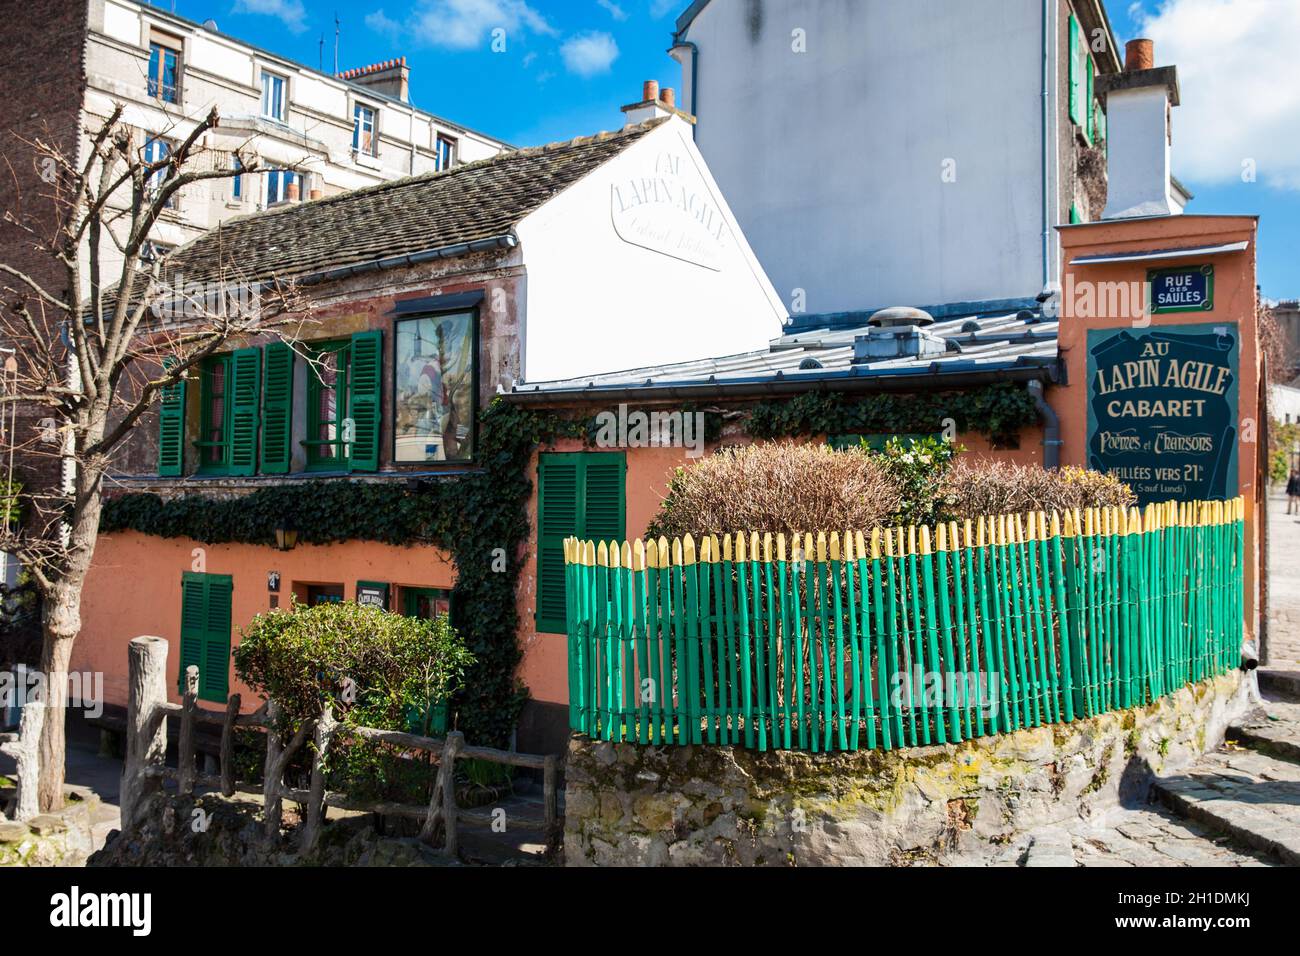 PARIS, FRANCE - MARCH, 2018: Famous cabaret called the agile rabbit located at a corner on the steep streets of Montmartre neighborhood in Paris Stock Photo